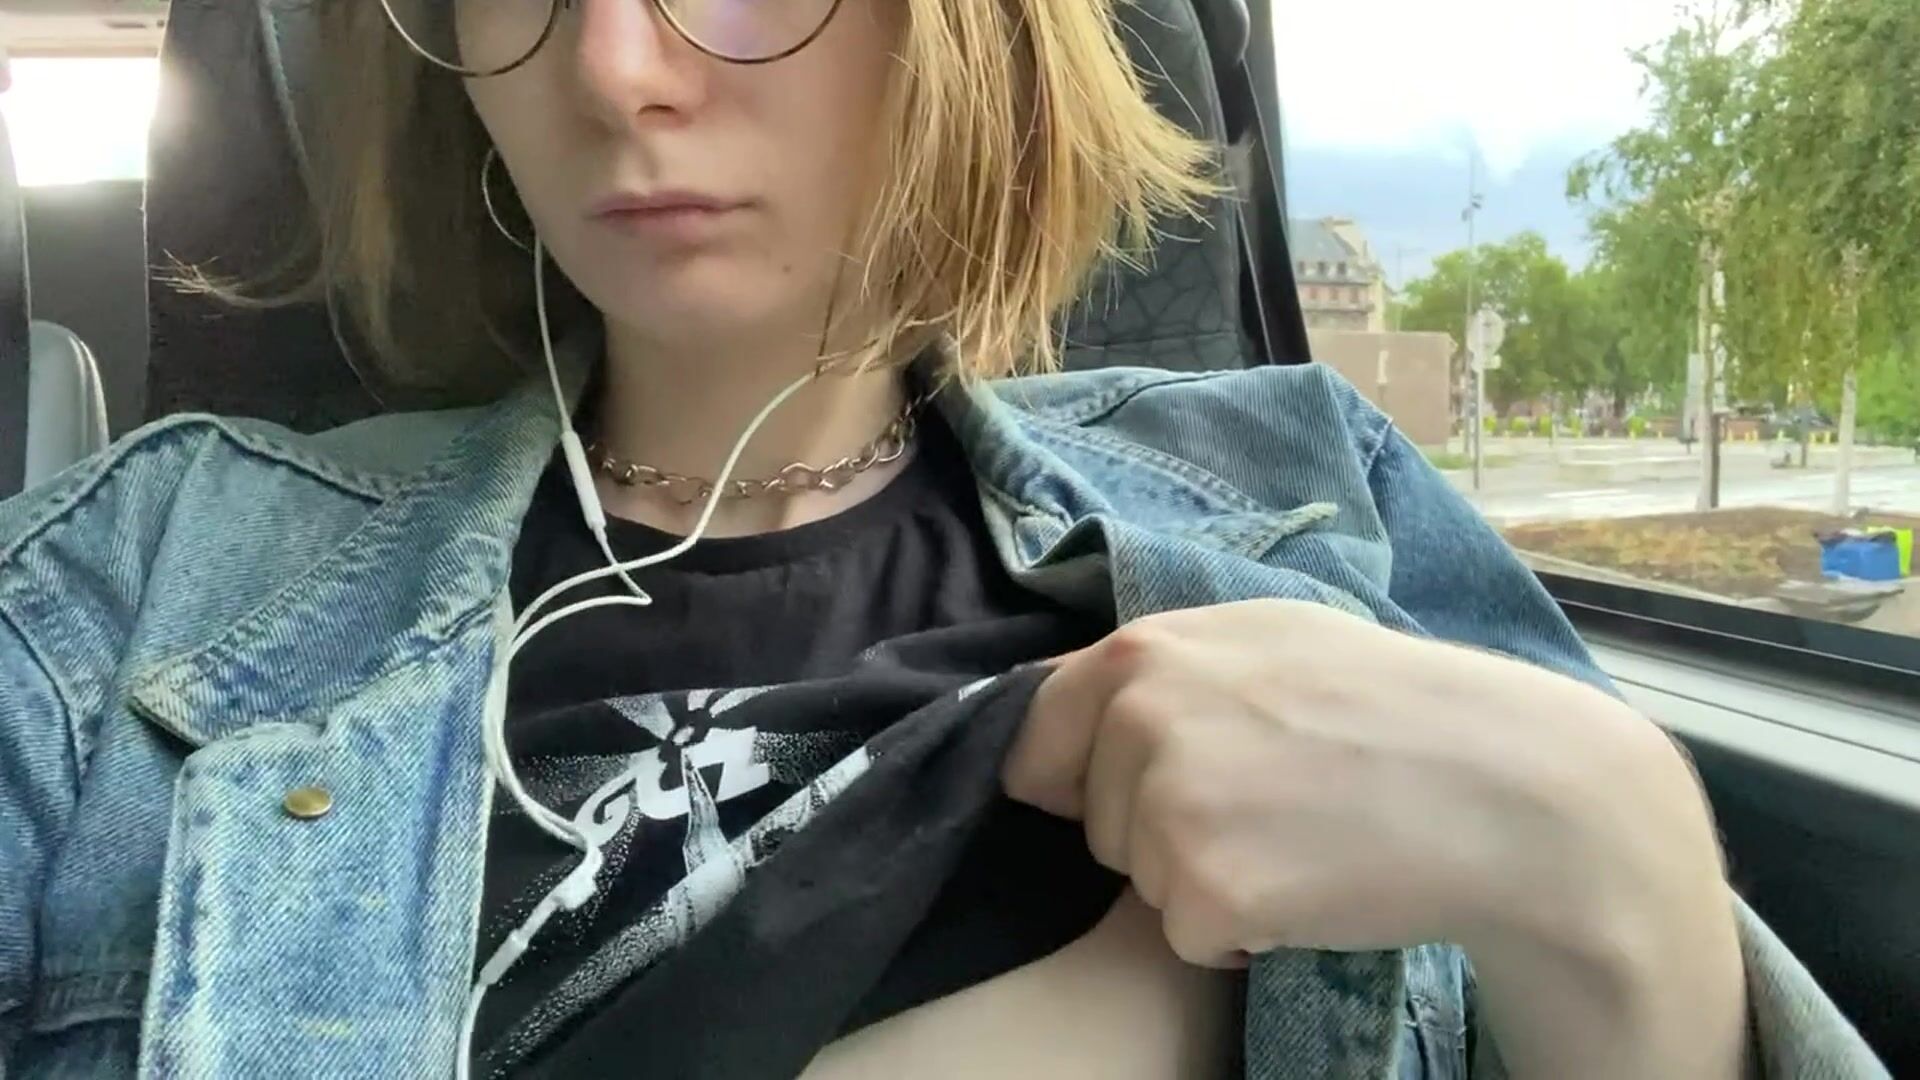 Guess I'm the nerdy girl showing her tits on the bus